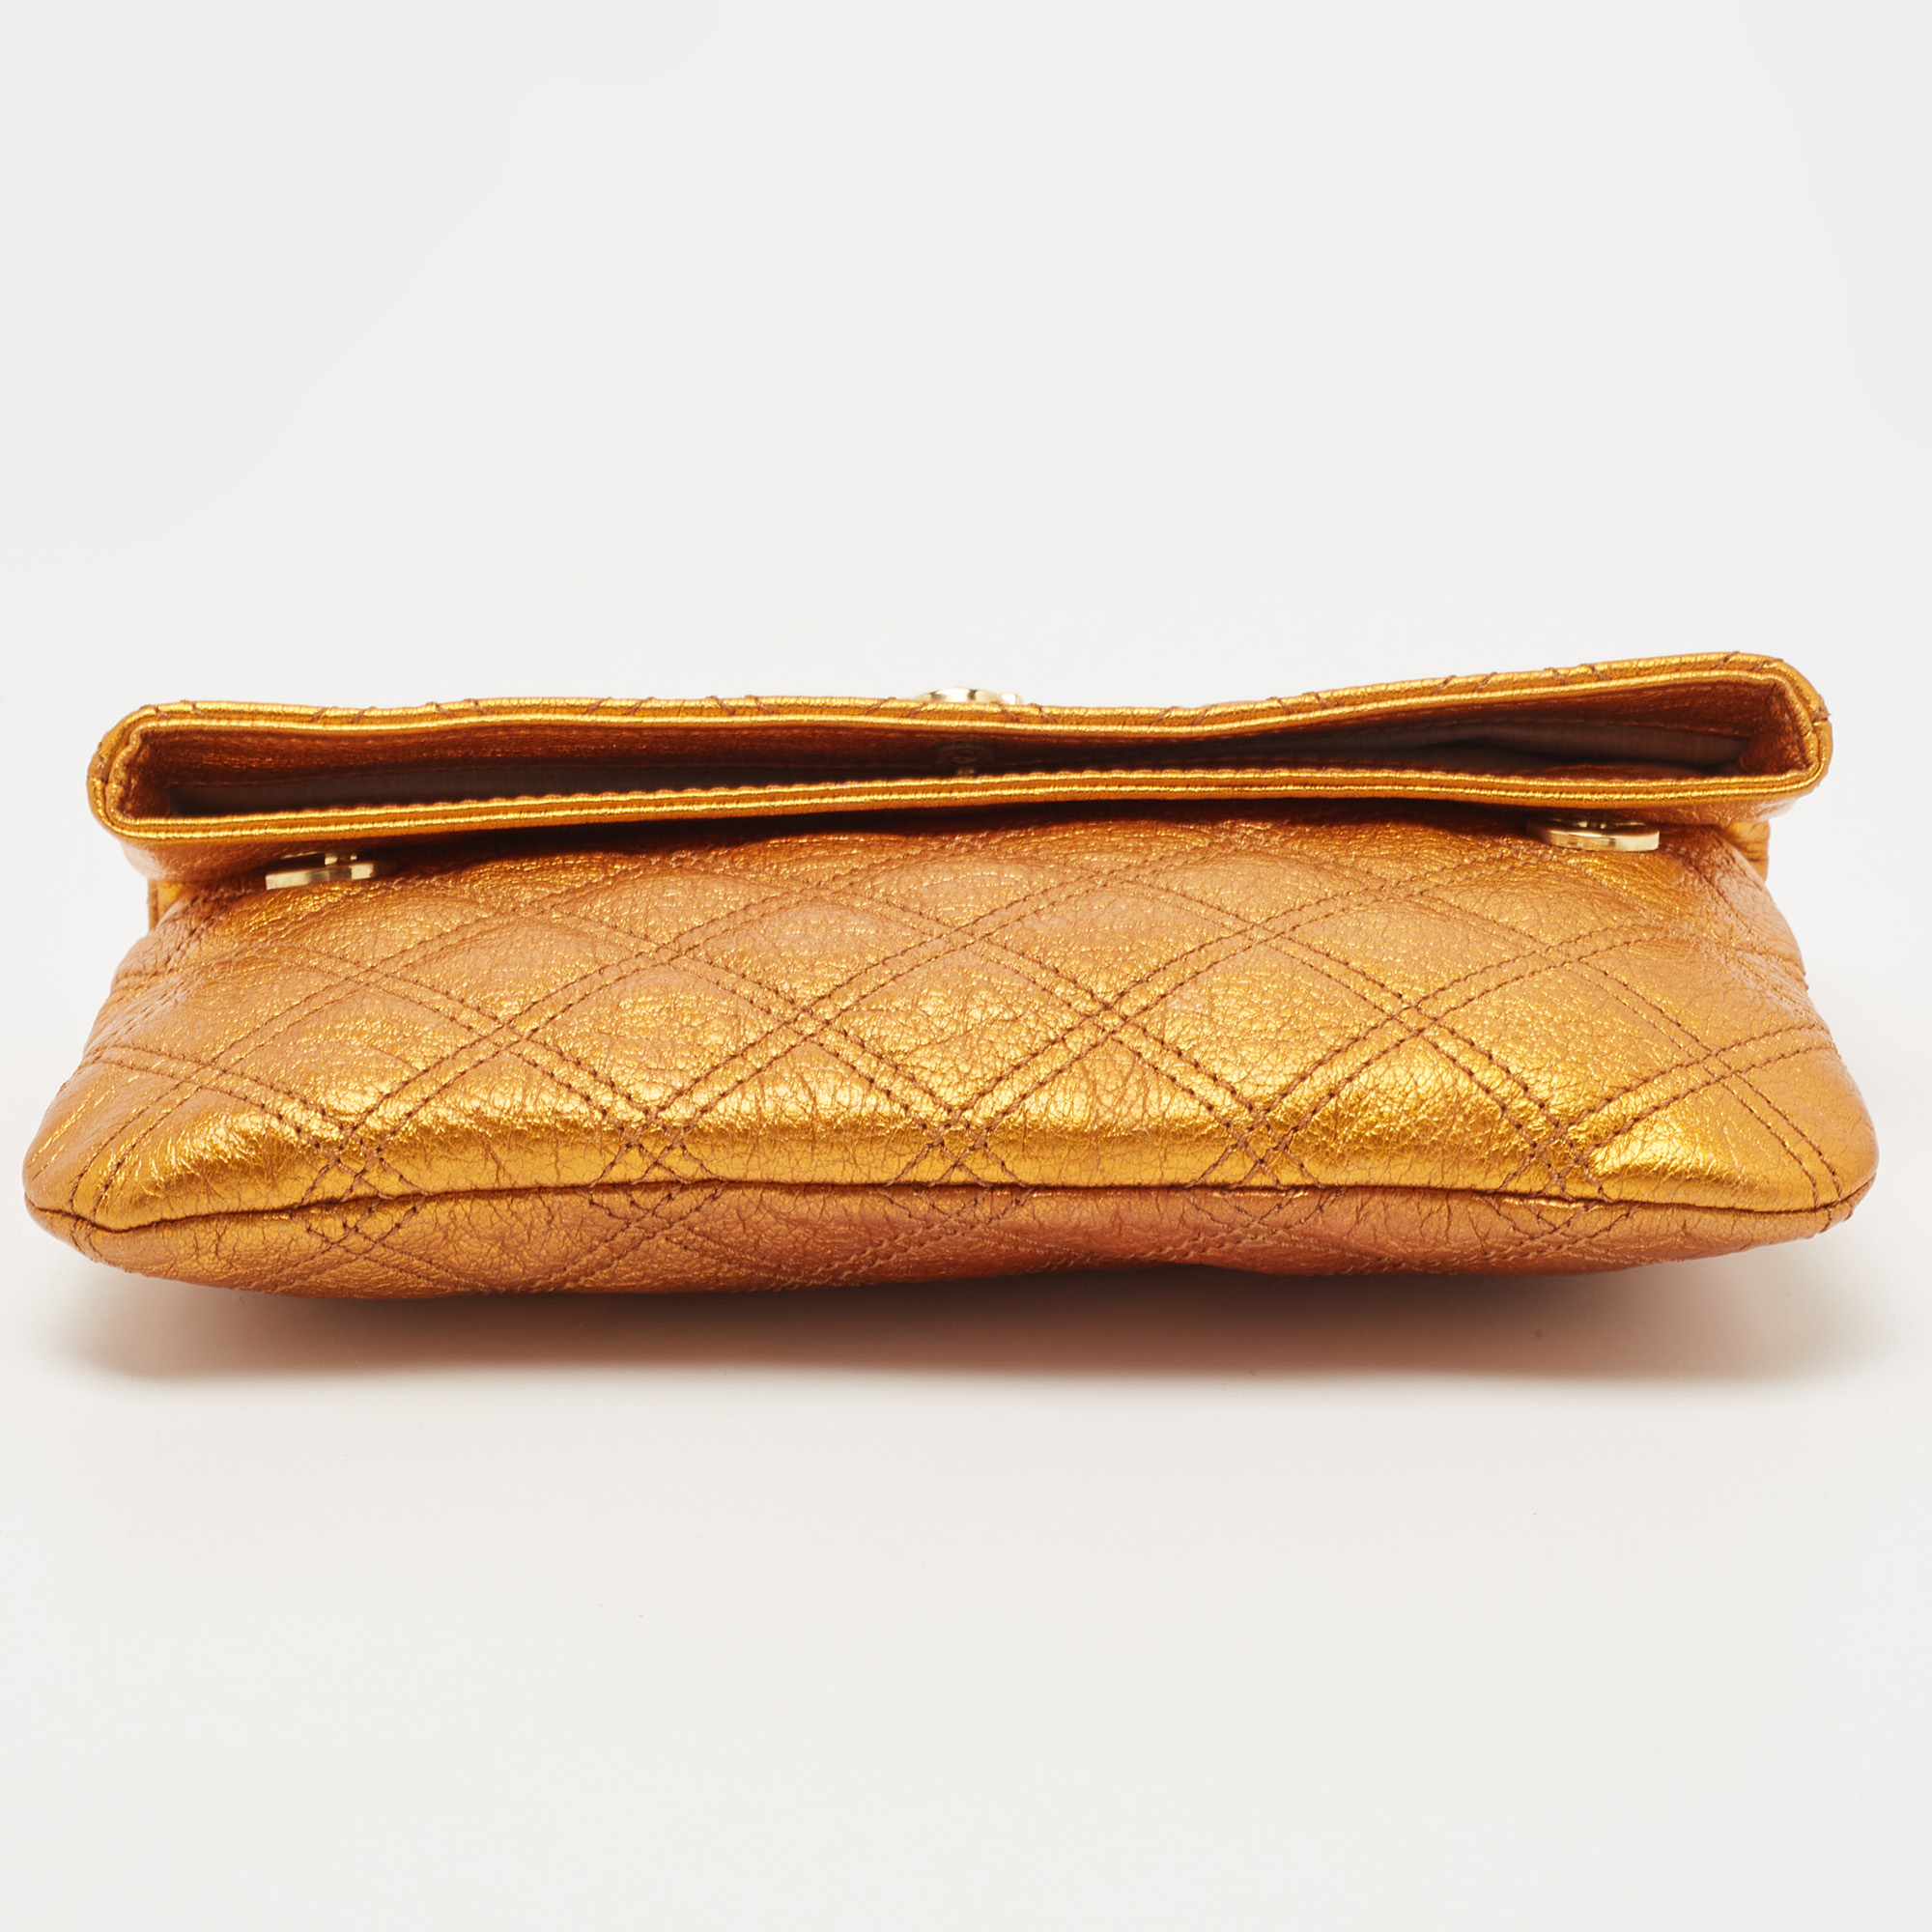 Marc Jacobs Metallic Orange Quilted Leather Eugenie Clutch